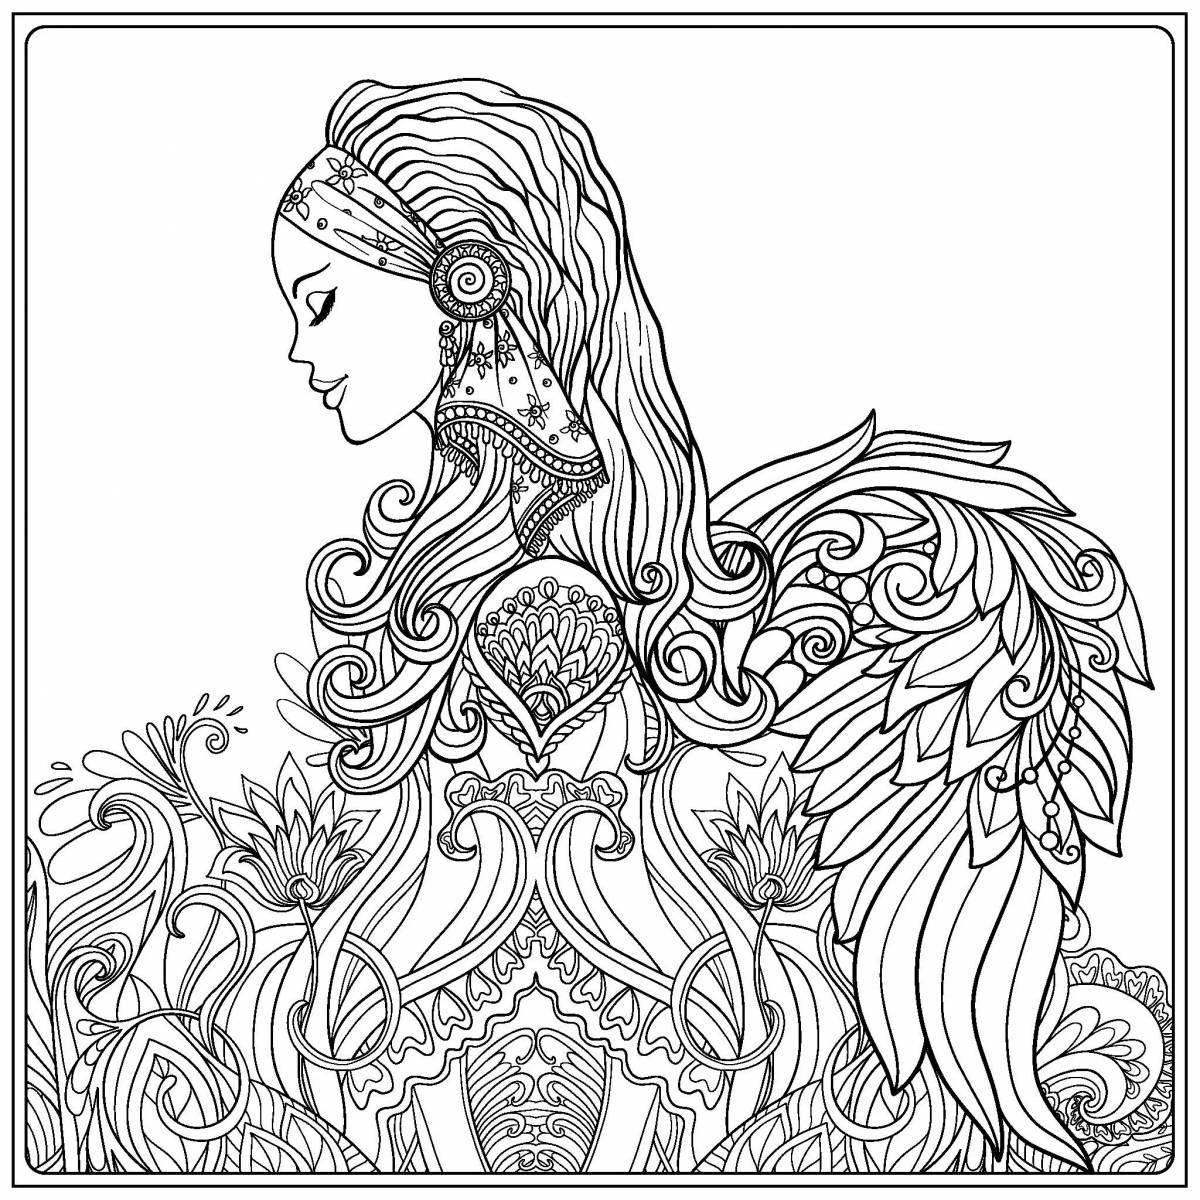 Delightful angel antistress coloring book